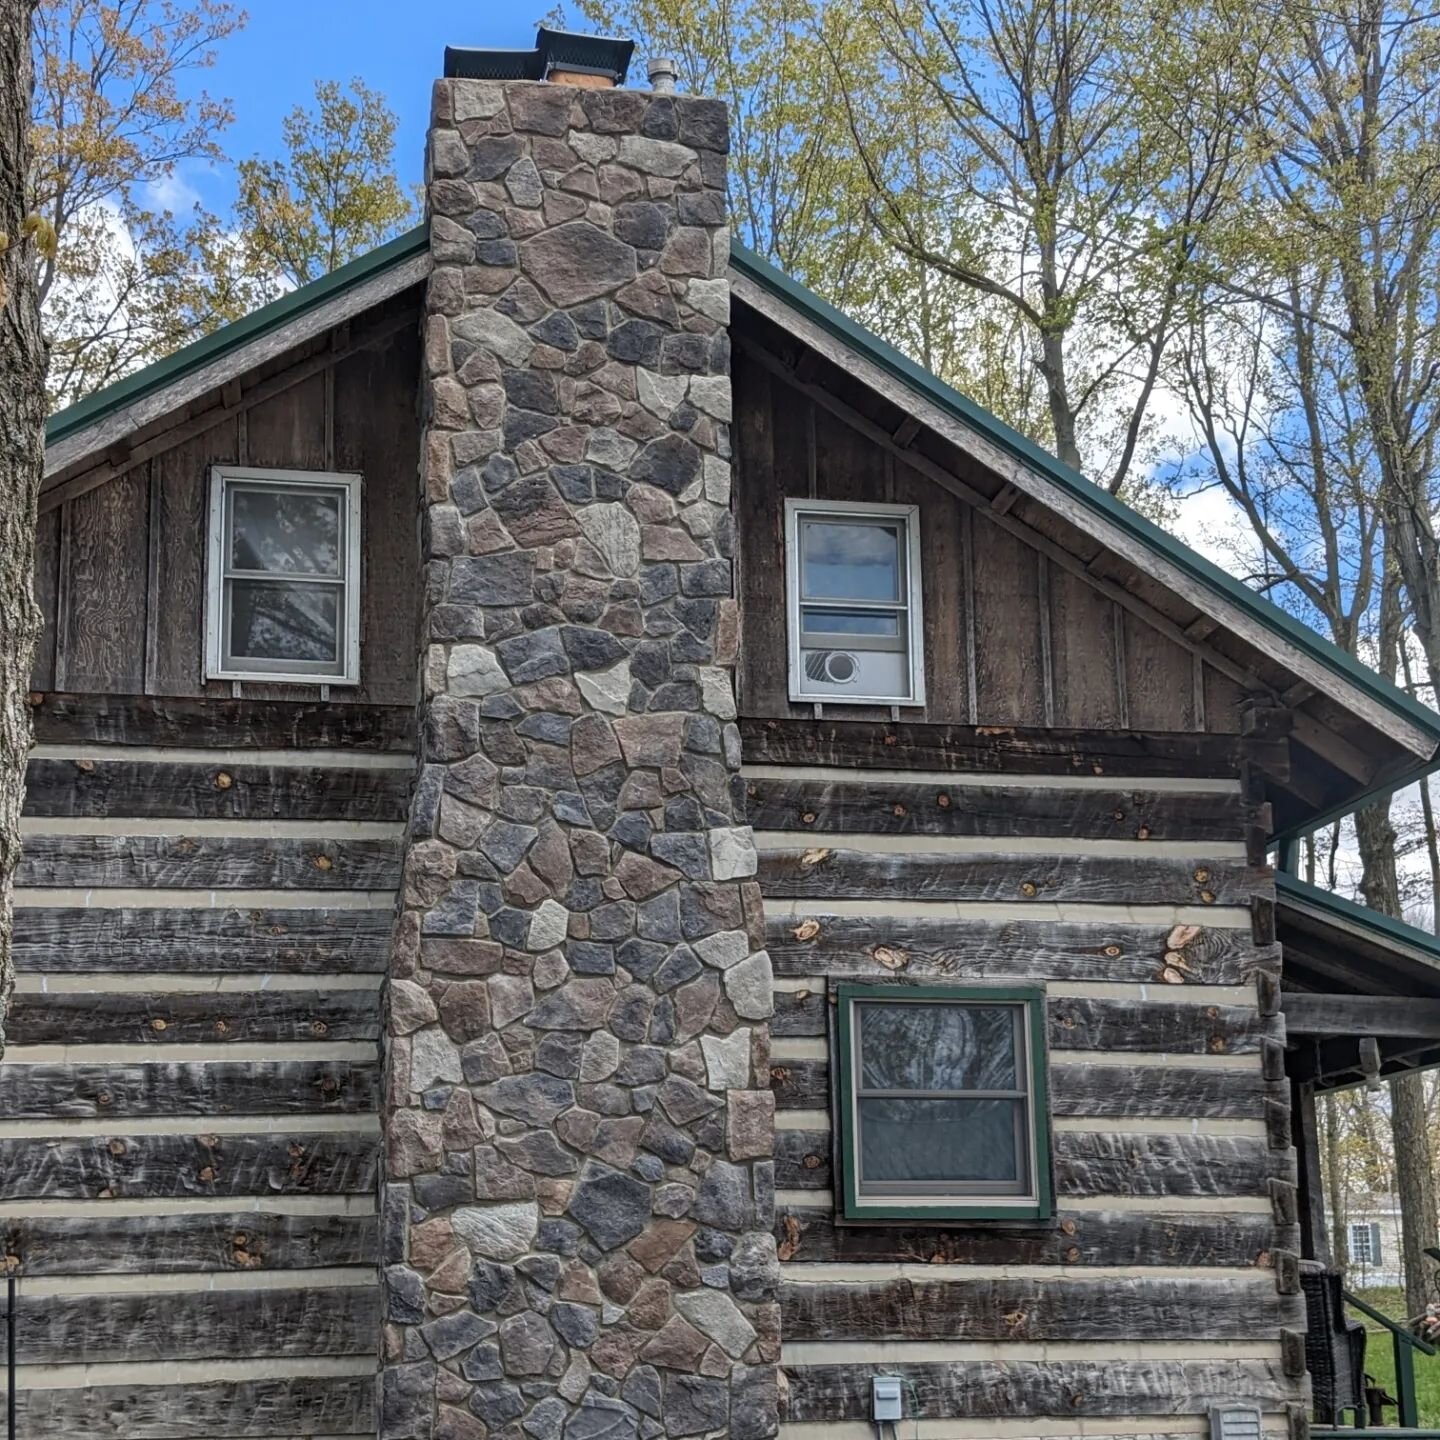 We installed stone onto this chimney using manufactured stone veneer.

Check out the time lapse of this project on our YouTube channel! https://youtu.be/QDHduiha1_s